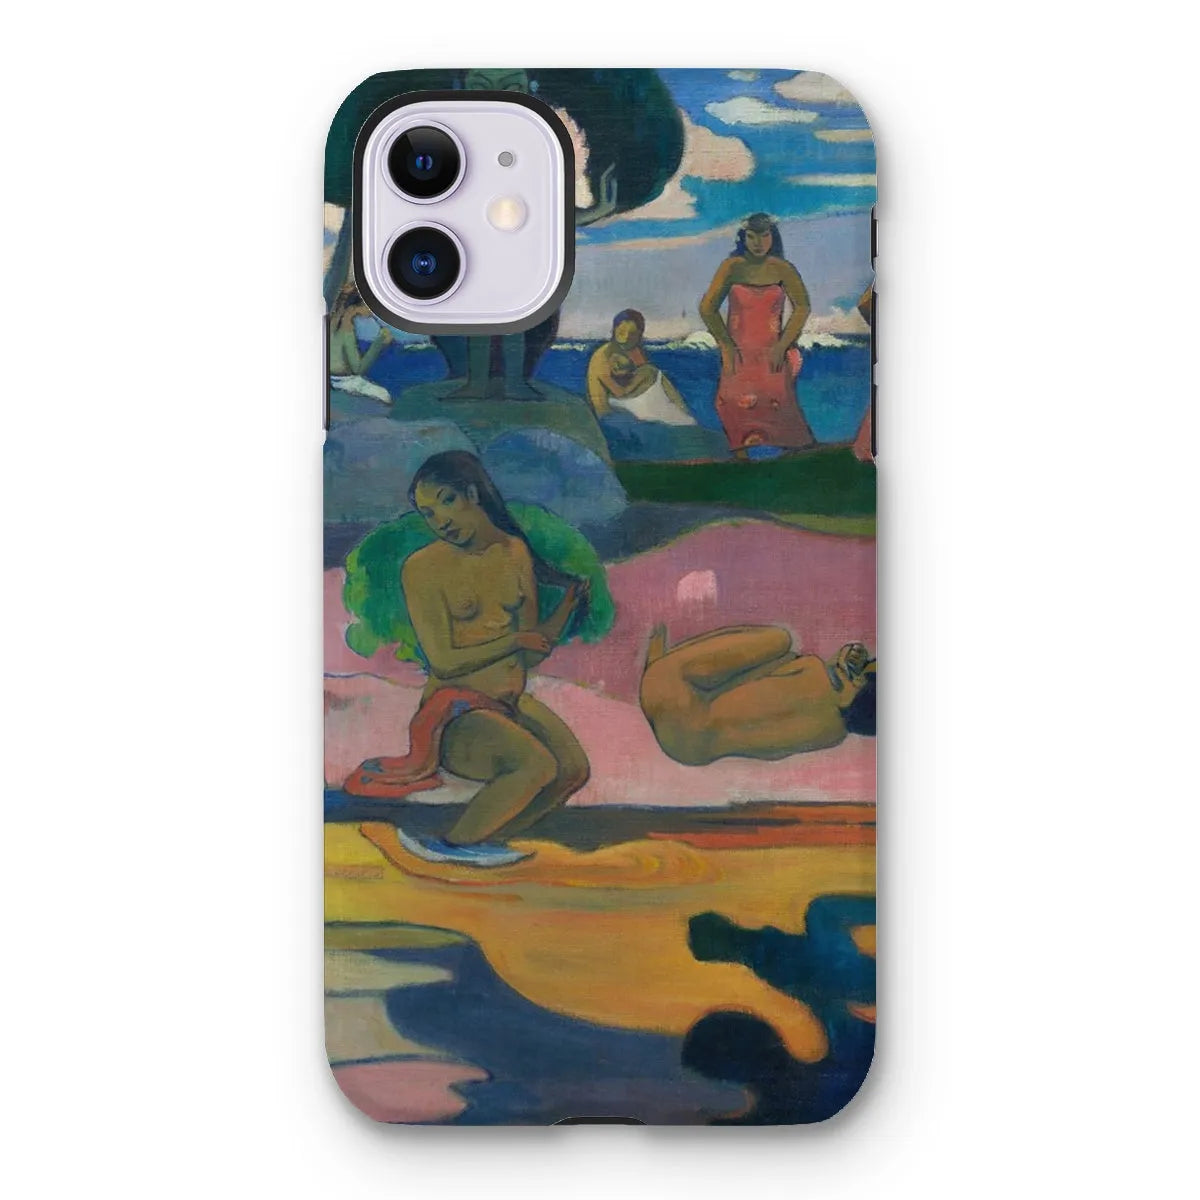 Day Of The God French Tahitian Art Phone Case - Paul Gauguin - Iphone 11 / Matte - Mobile Phone Cases - Aesthetic Art